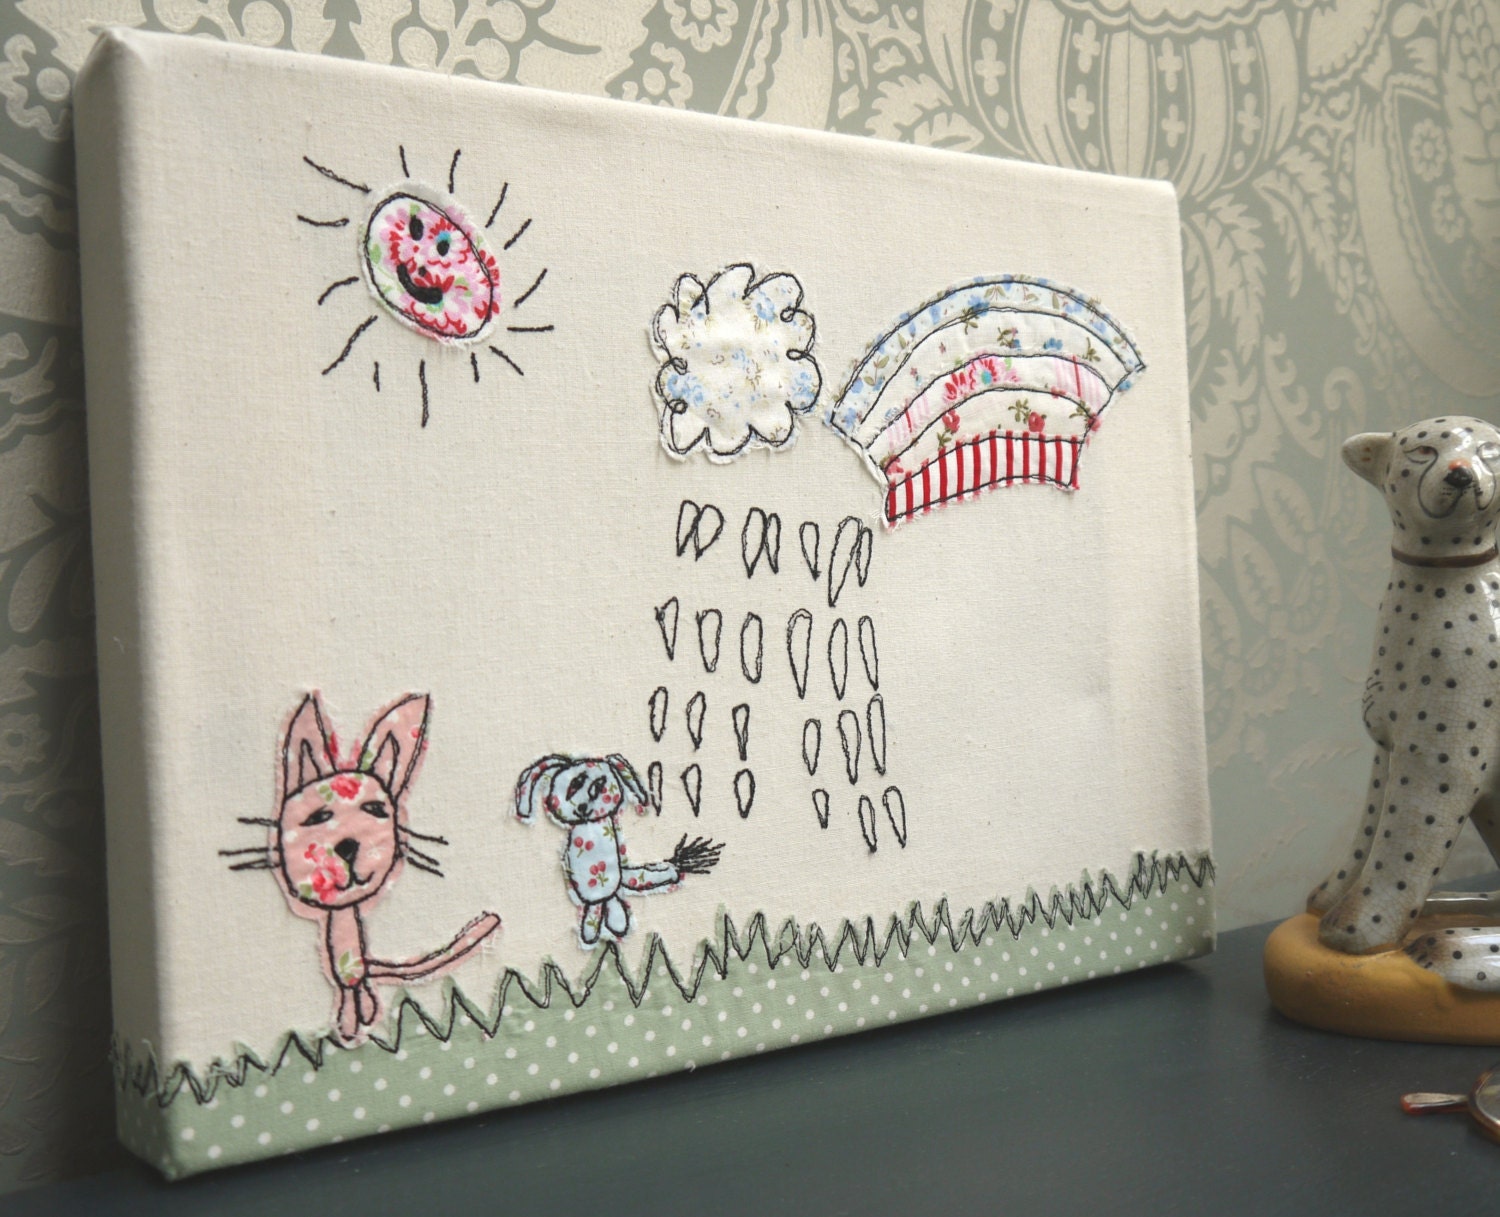 Your own child's drawing sewn onto a stretched calico frame using freehand machine embroidery and appliquÃ© - ditsydoodles